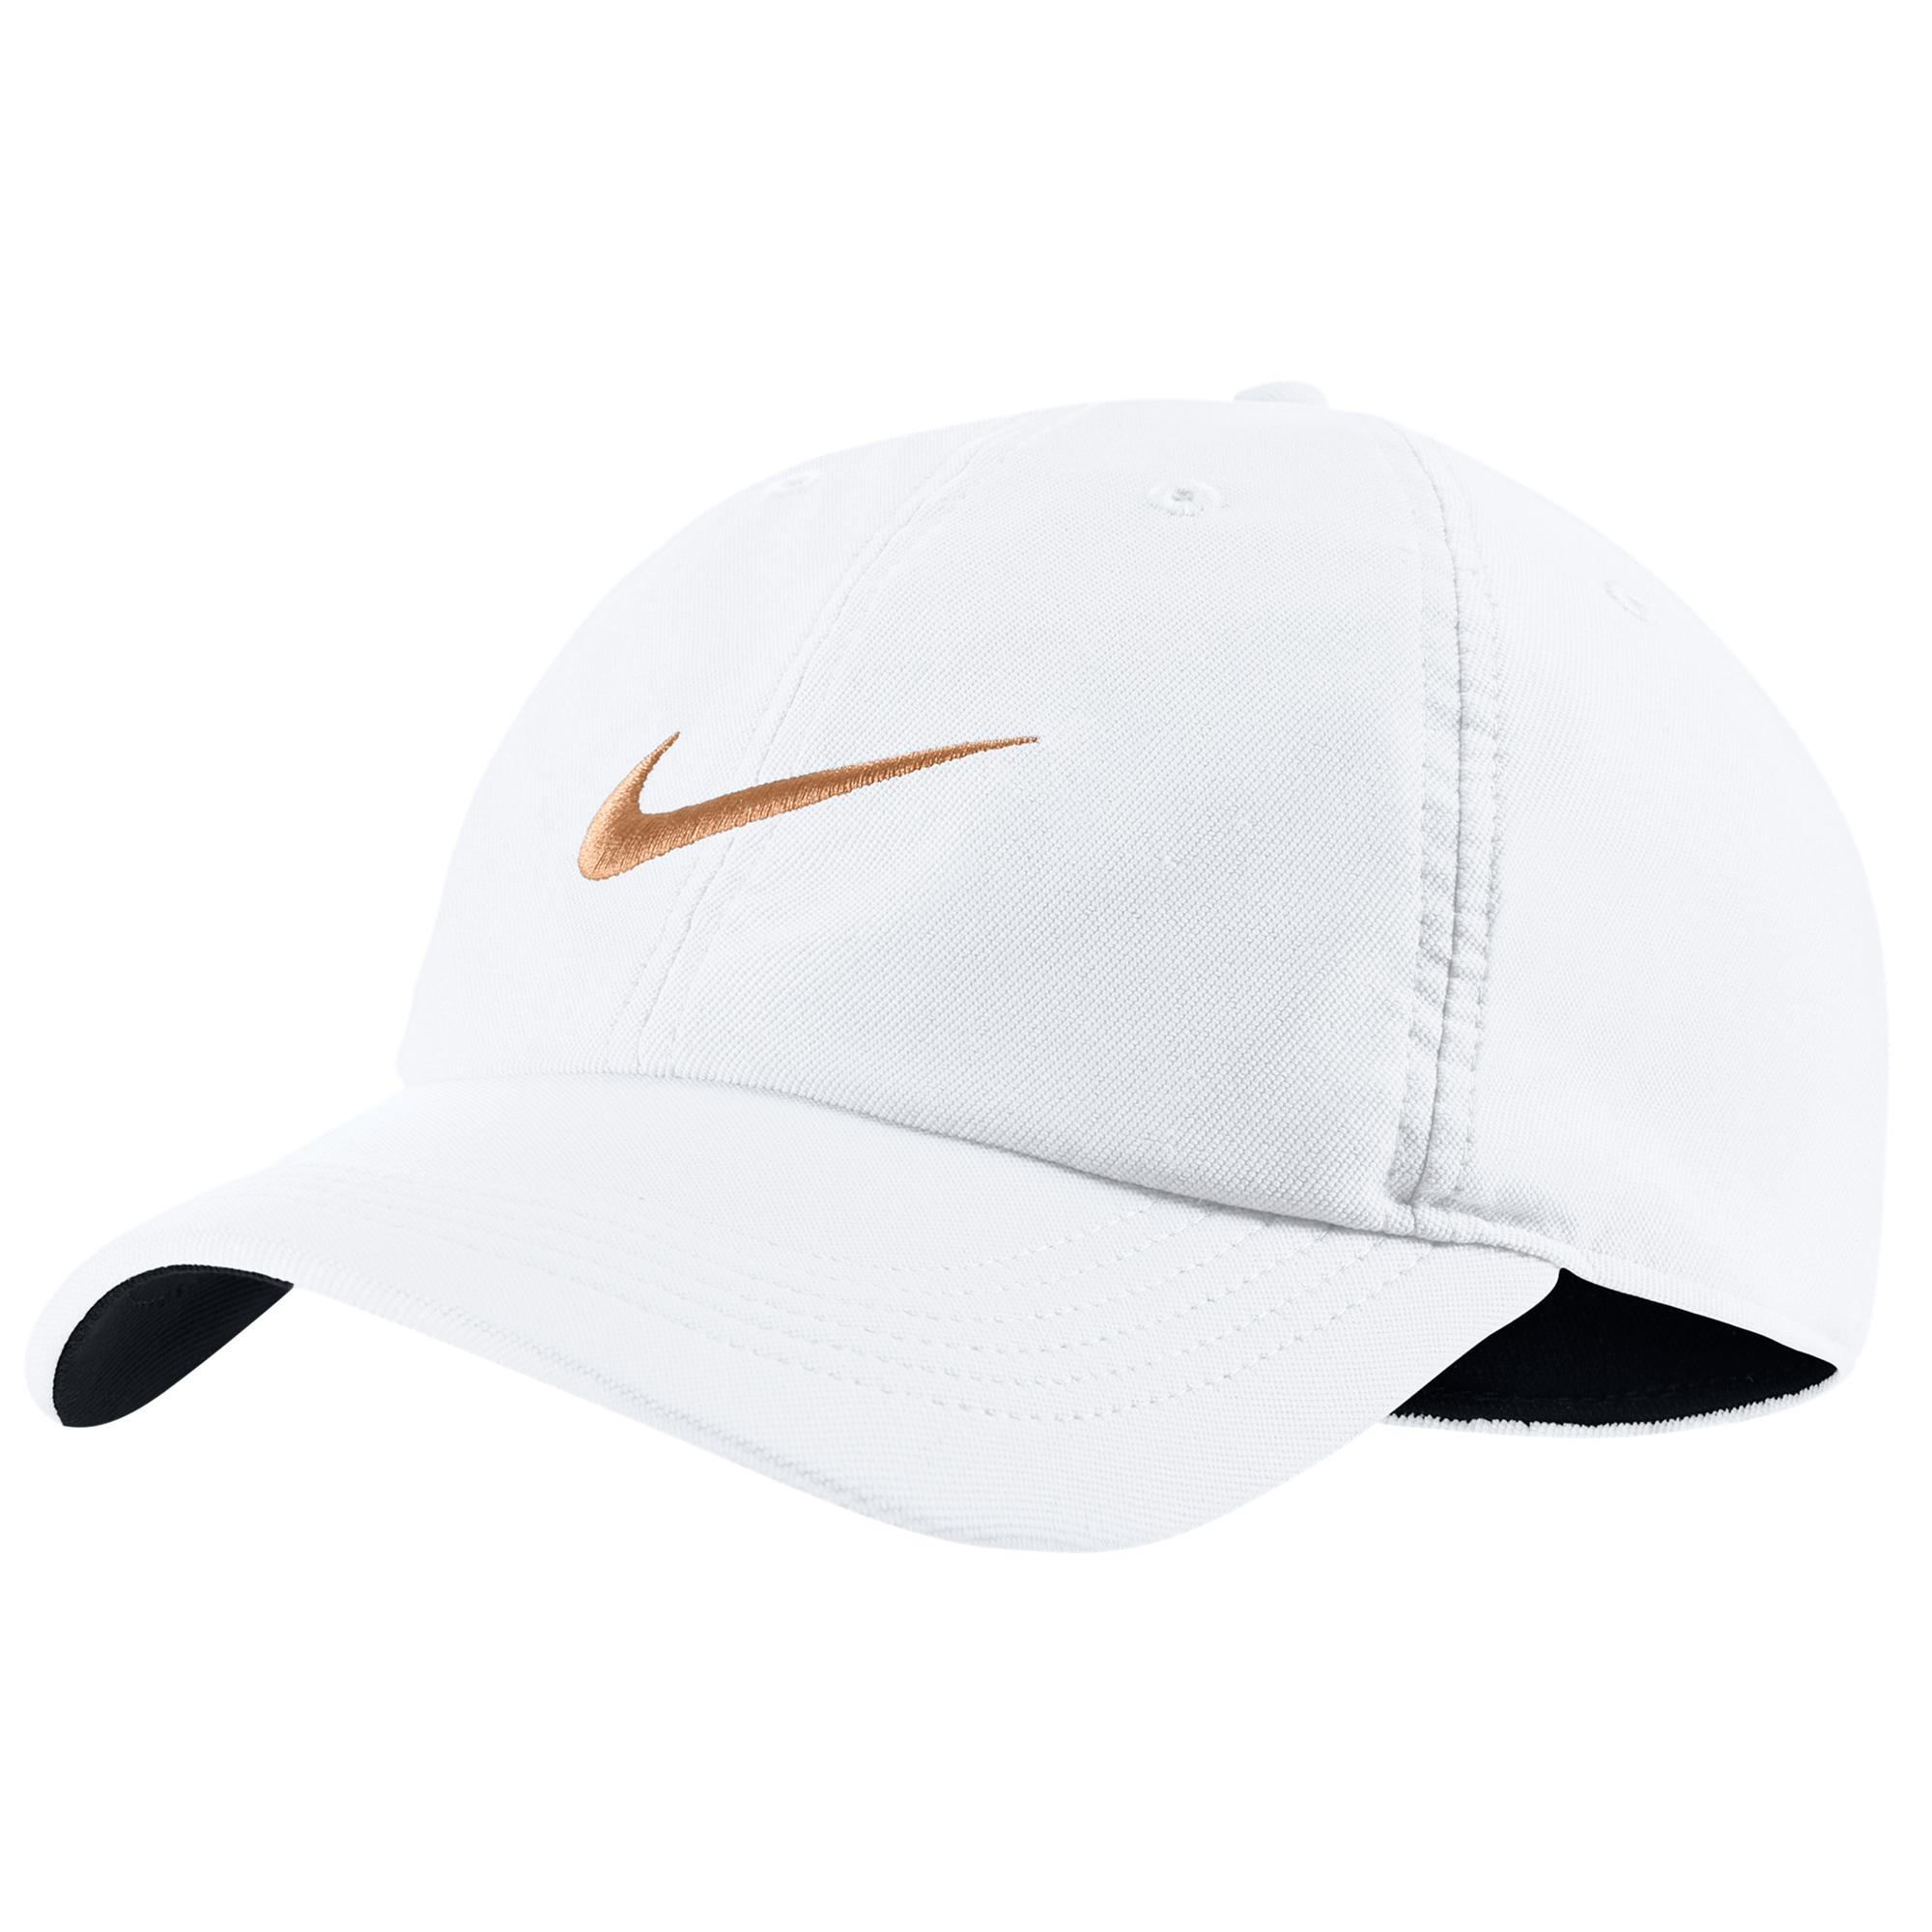 Nike Synthetic Aerobill H86 Cap in 